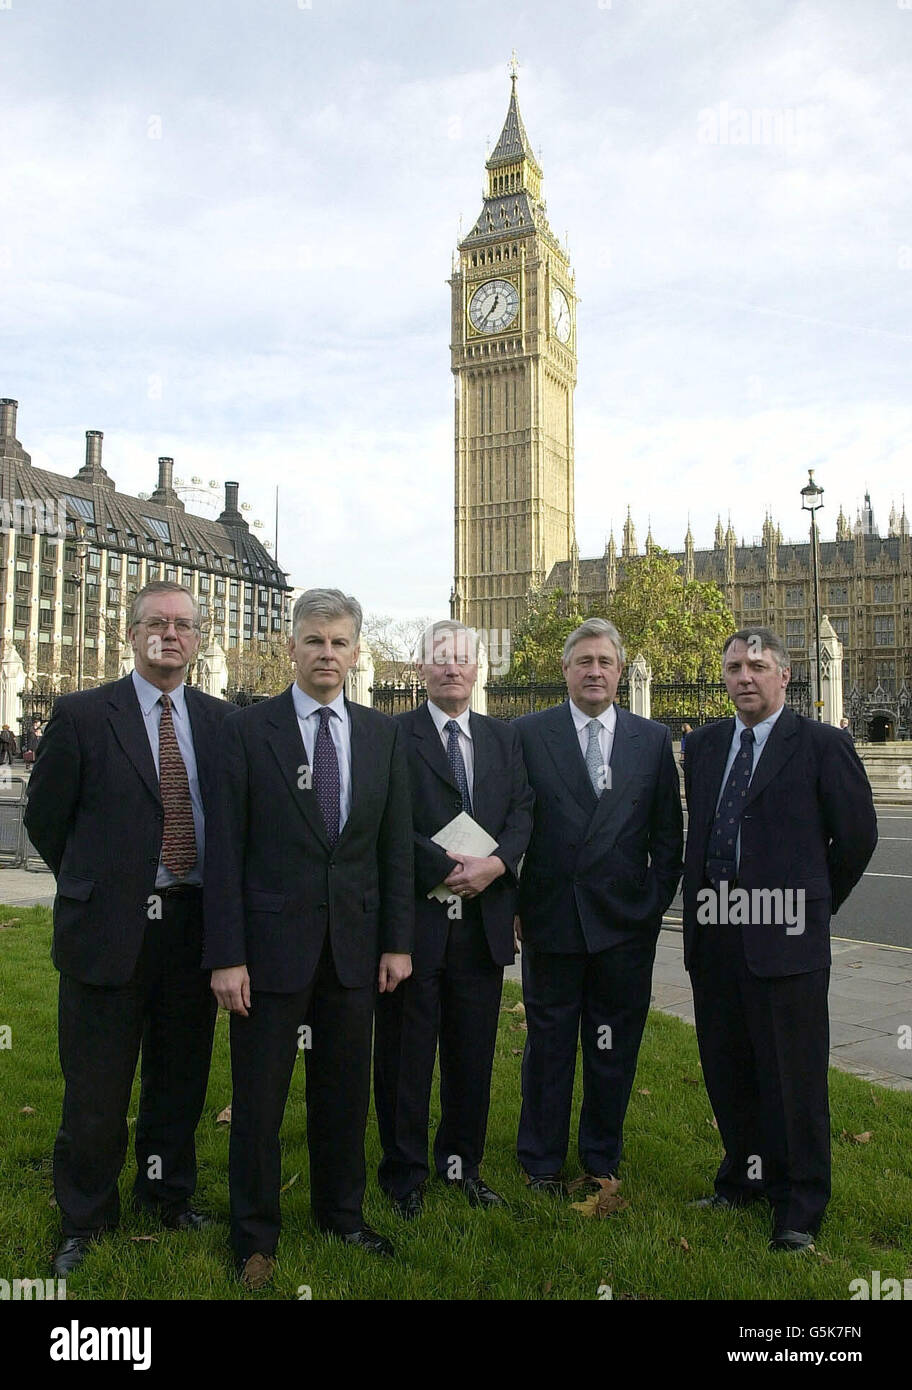 From left, MP for Nuneaton Bill Olner, MP for North Warwickshire Mike O'Brien, MP for Coventry South Jim Cunningham, MP for Coventry North West Geoffrey Robinson and MP for Rugby and Kenilworth Andy King outside the Houses of Parliament in London. *The five are protesting about the running of Coventry's NHS trust. Stock Photo